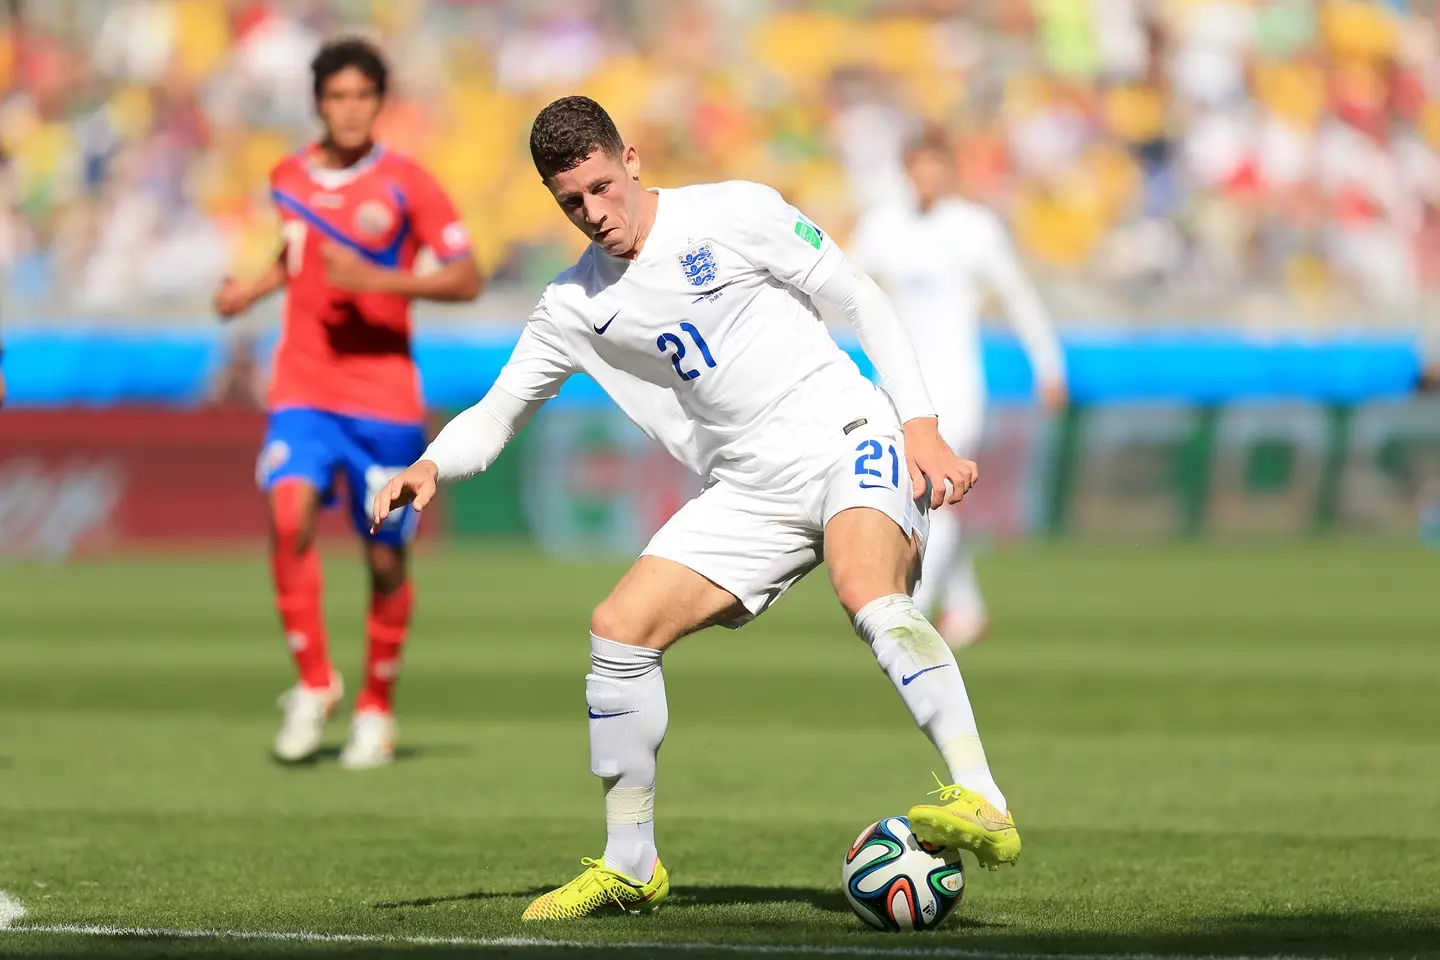 Barkley played in the 2014 World Cup. Image: Alamy